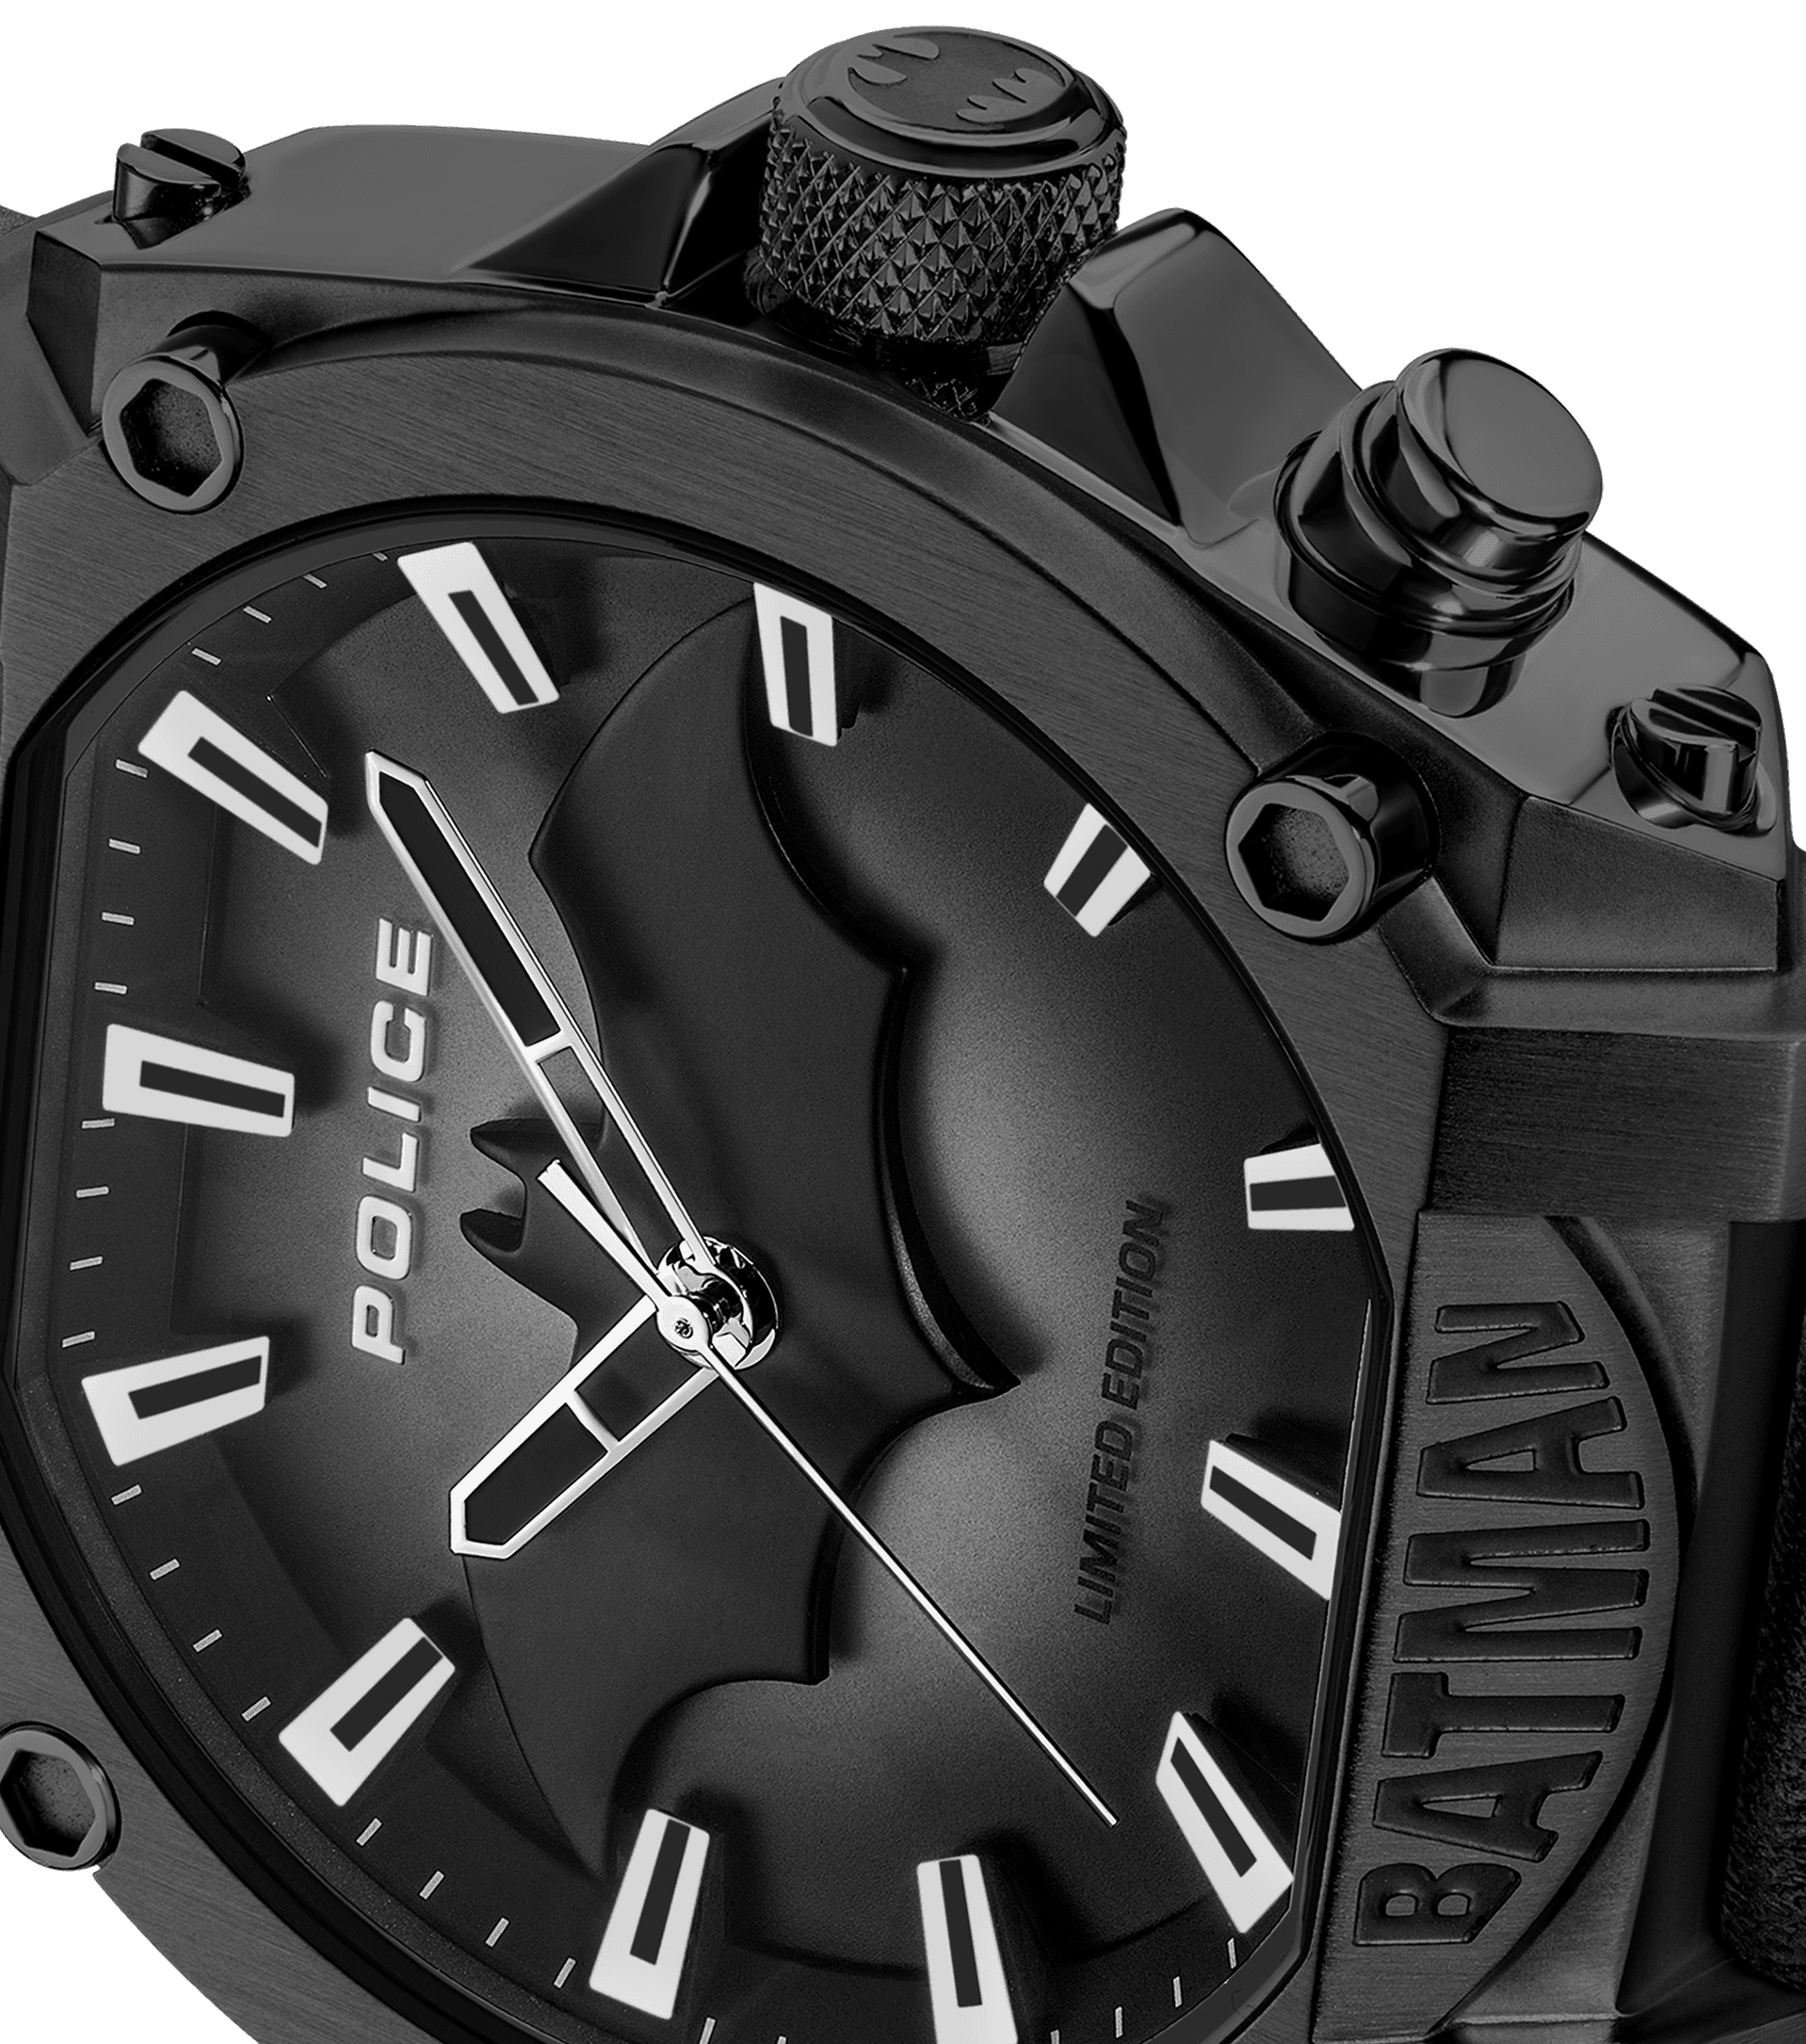 Police watches - Forever Batman Watch Police For Men Black, Black